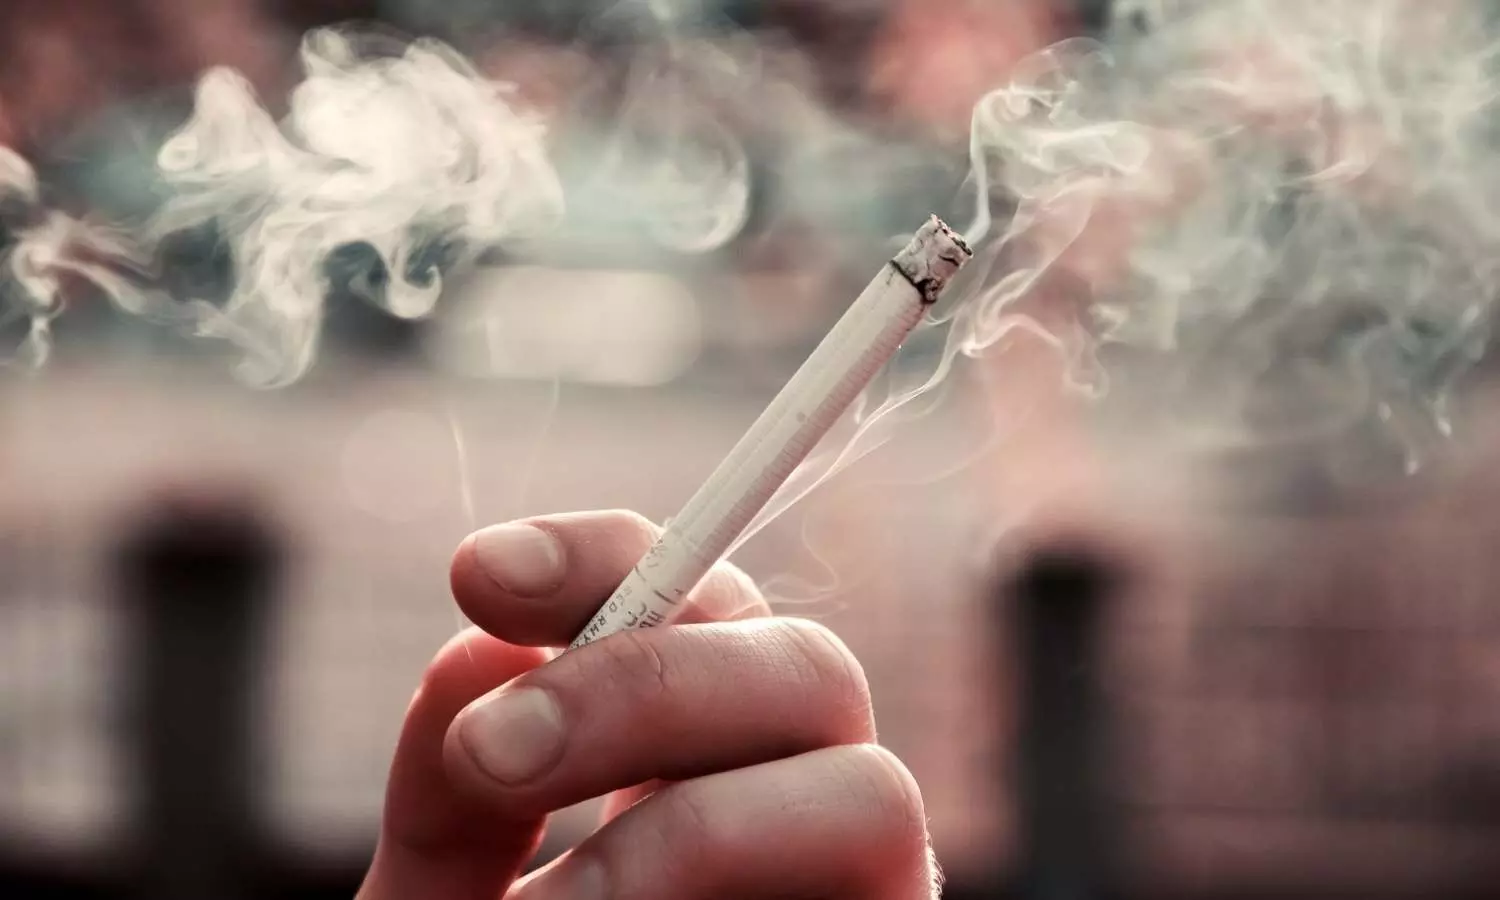 Smoking and vaping had overlapping adverse health effects, dual product use may be worse